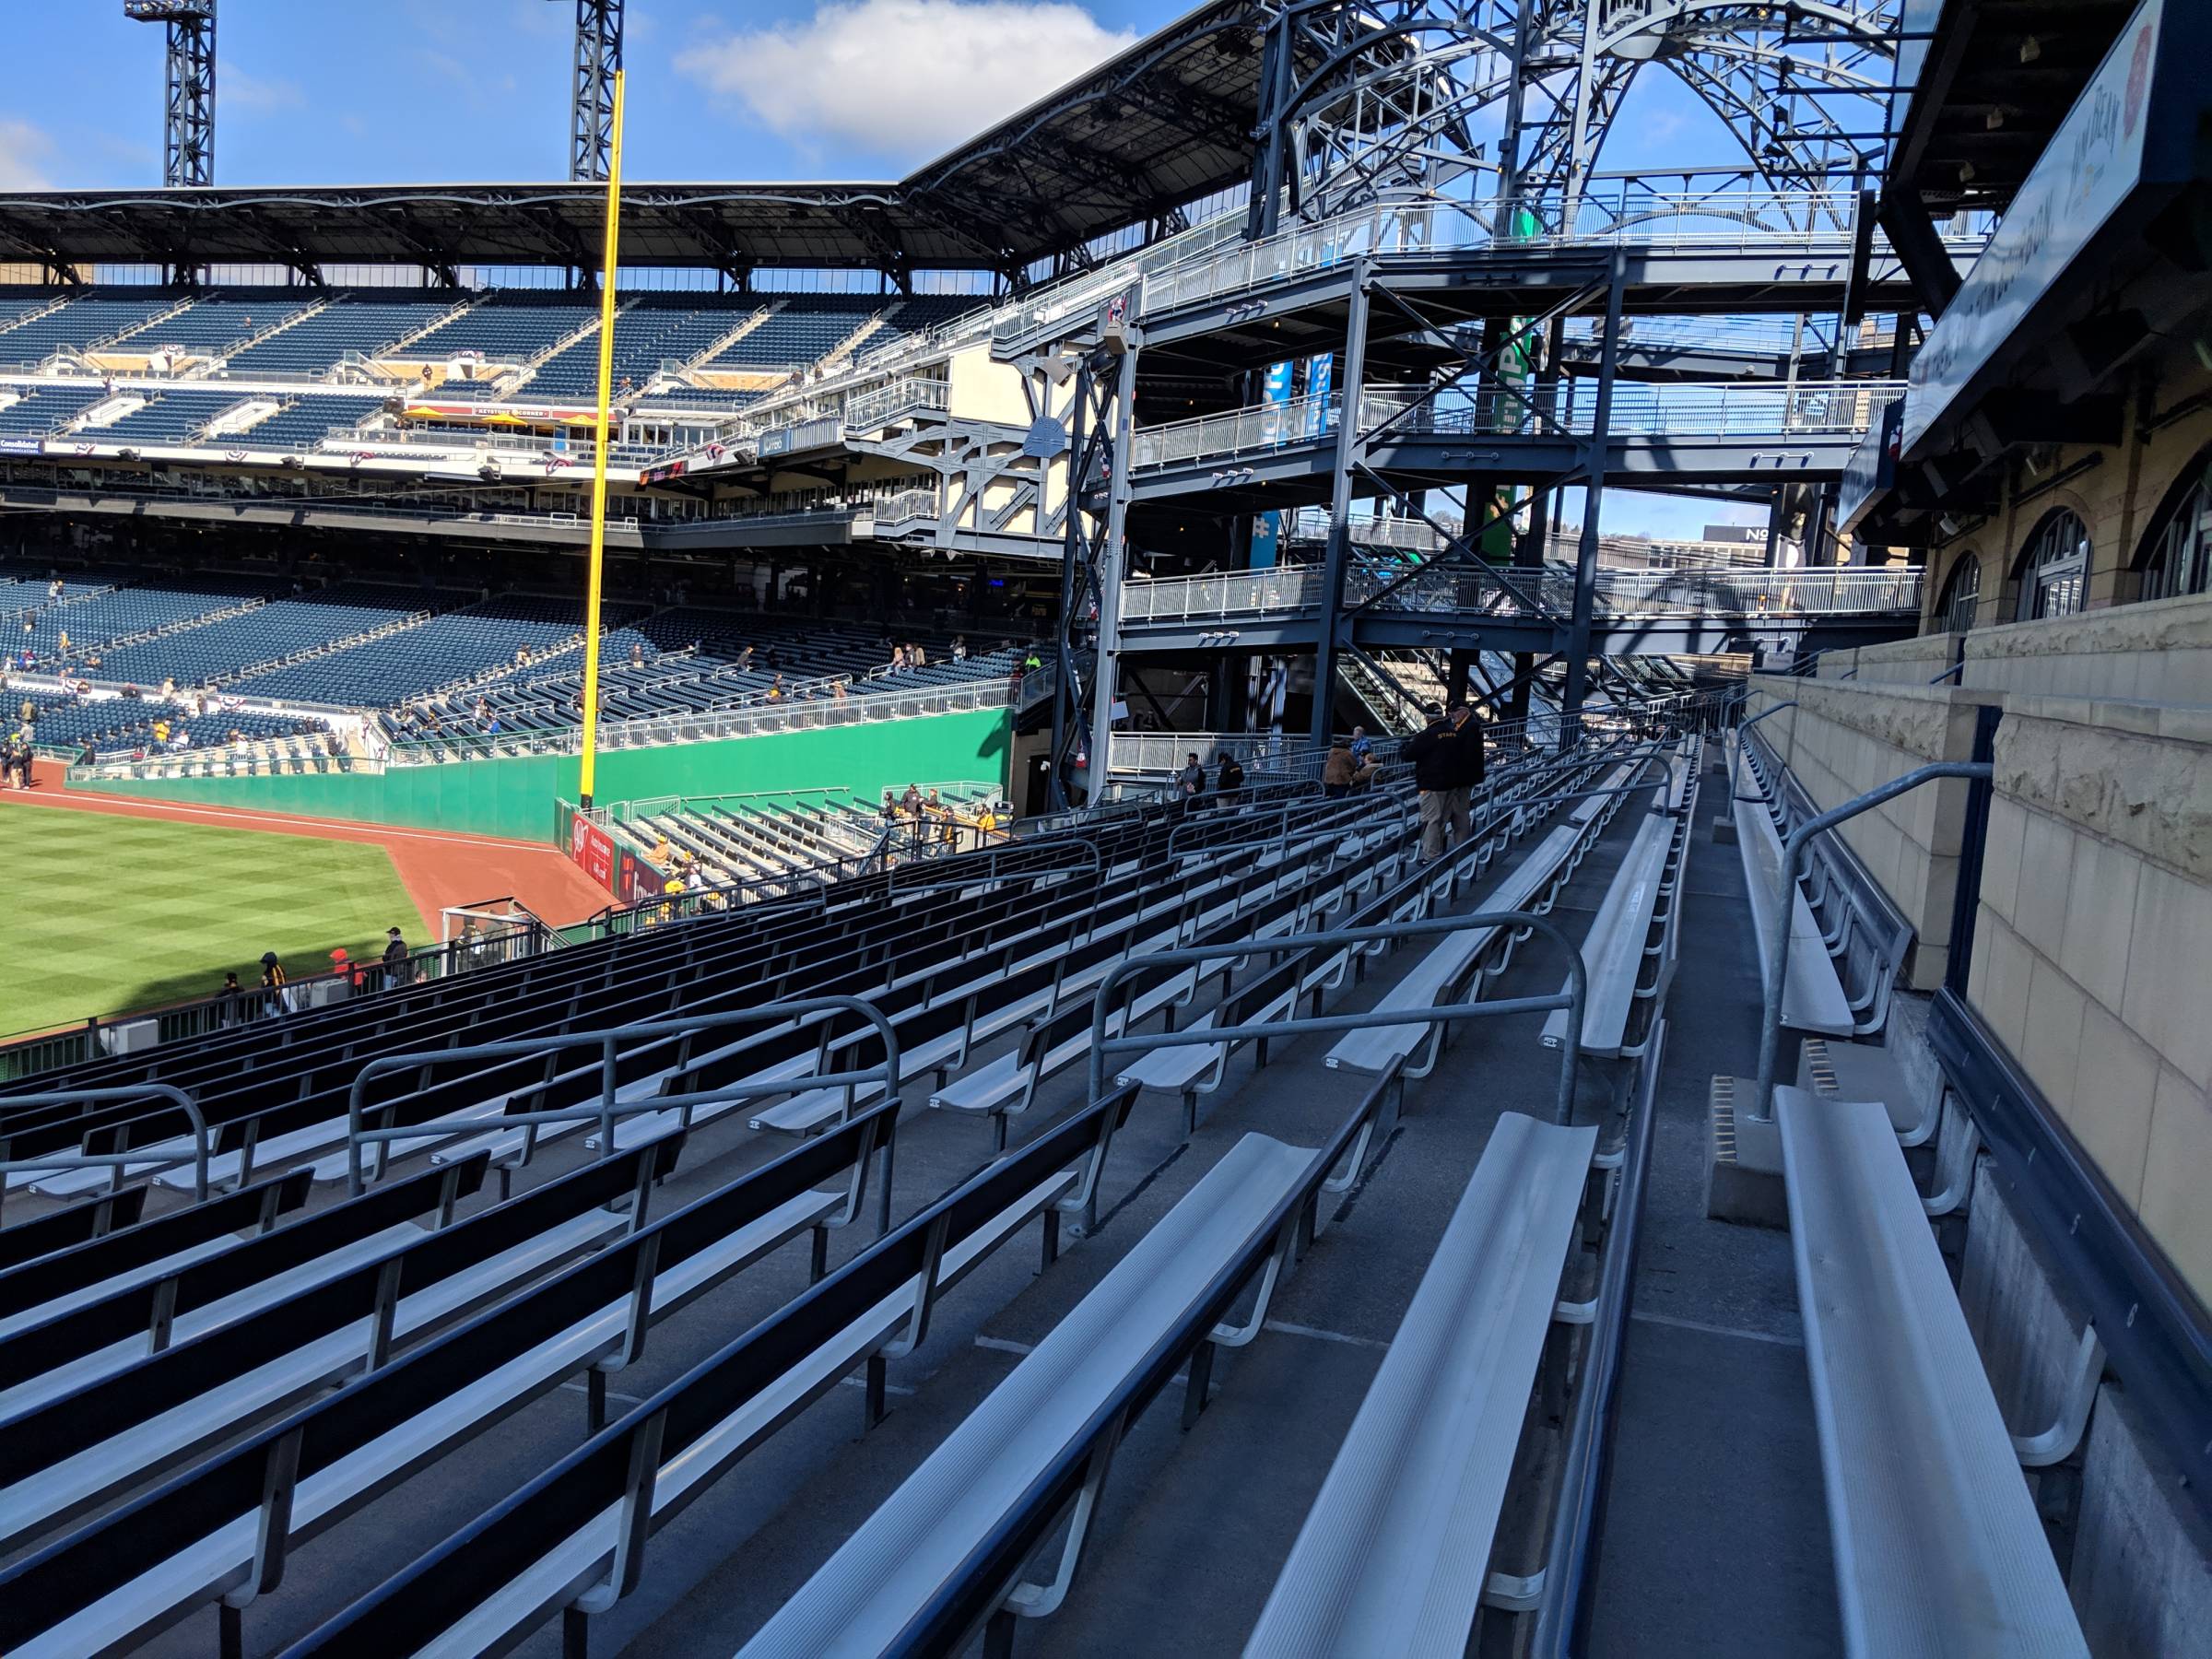 Picture Perfect PNC Park – All About That Base